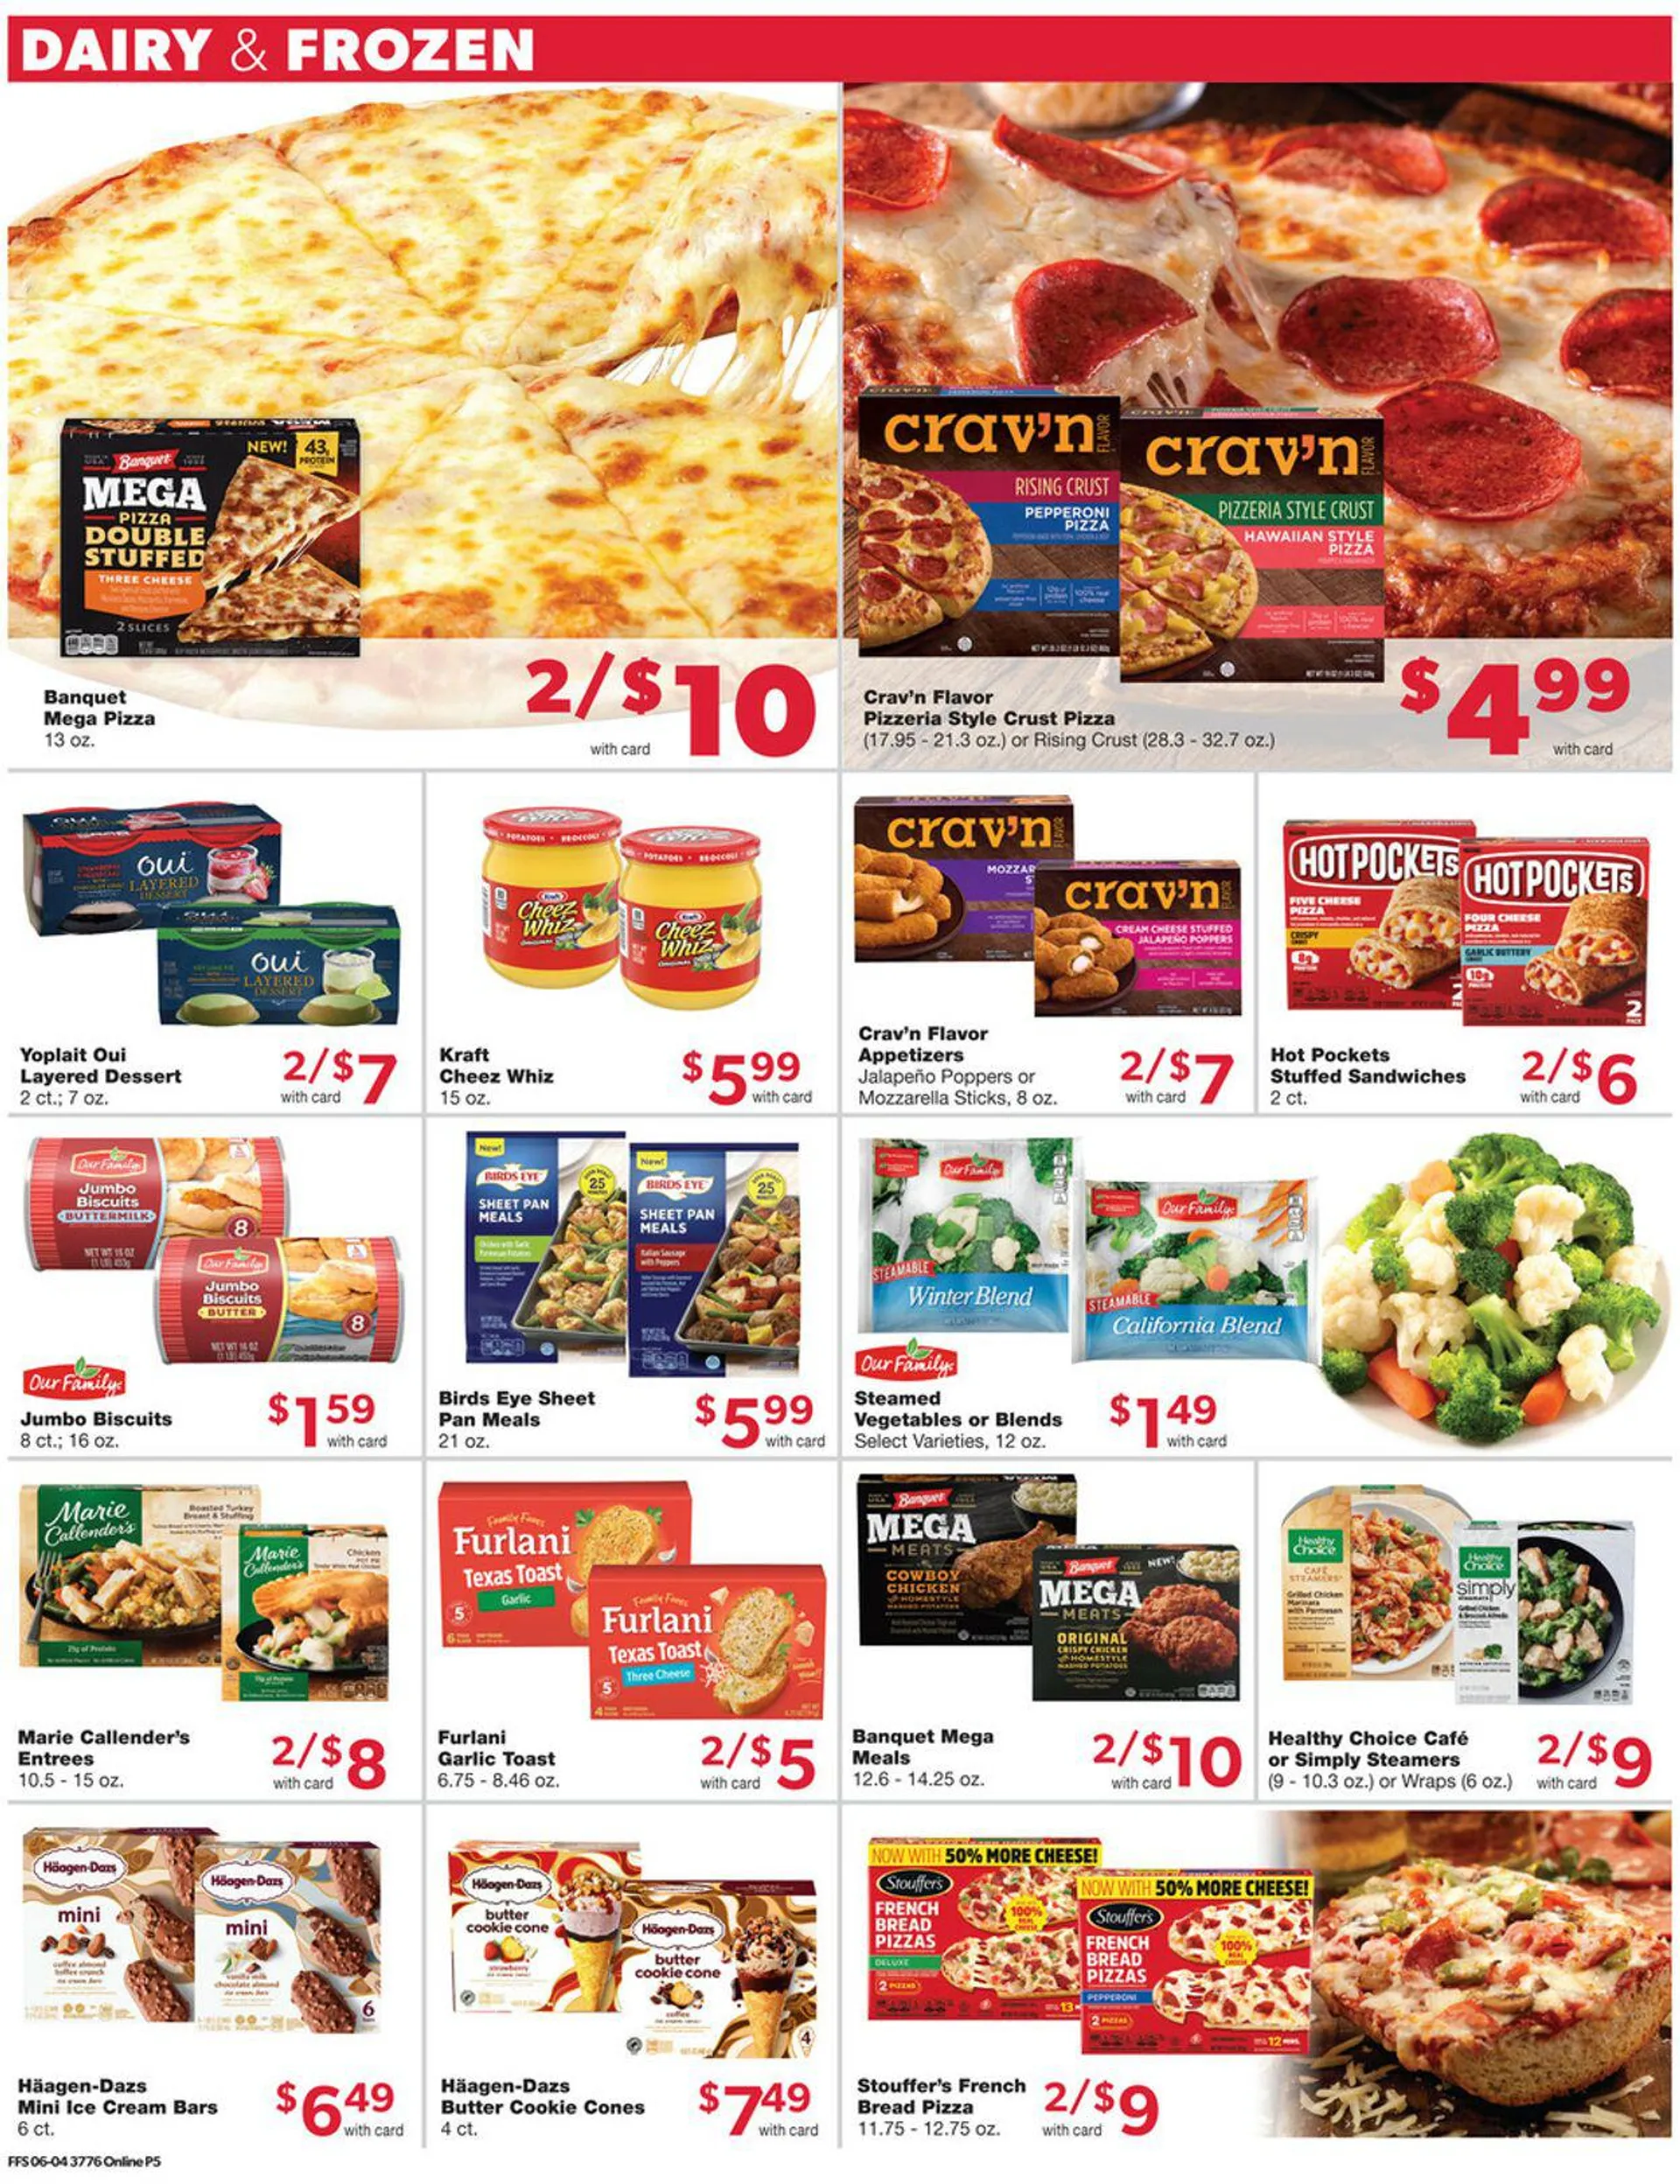 Family Fare Current weekly ad - 9